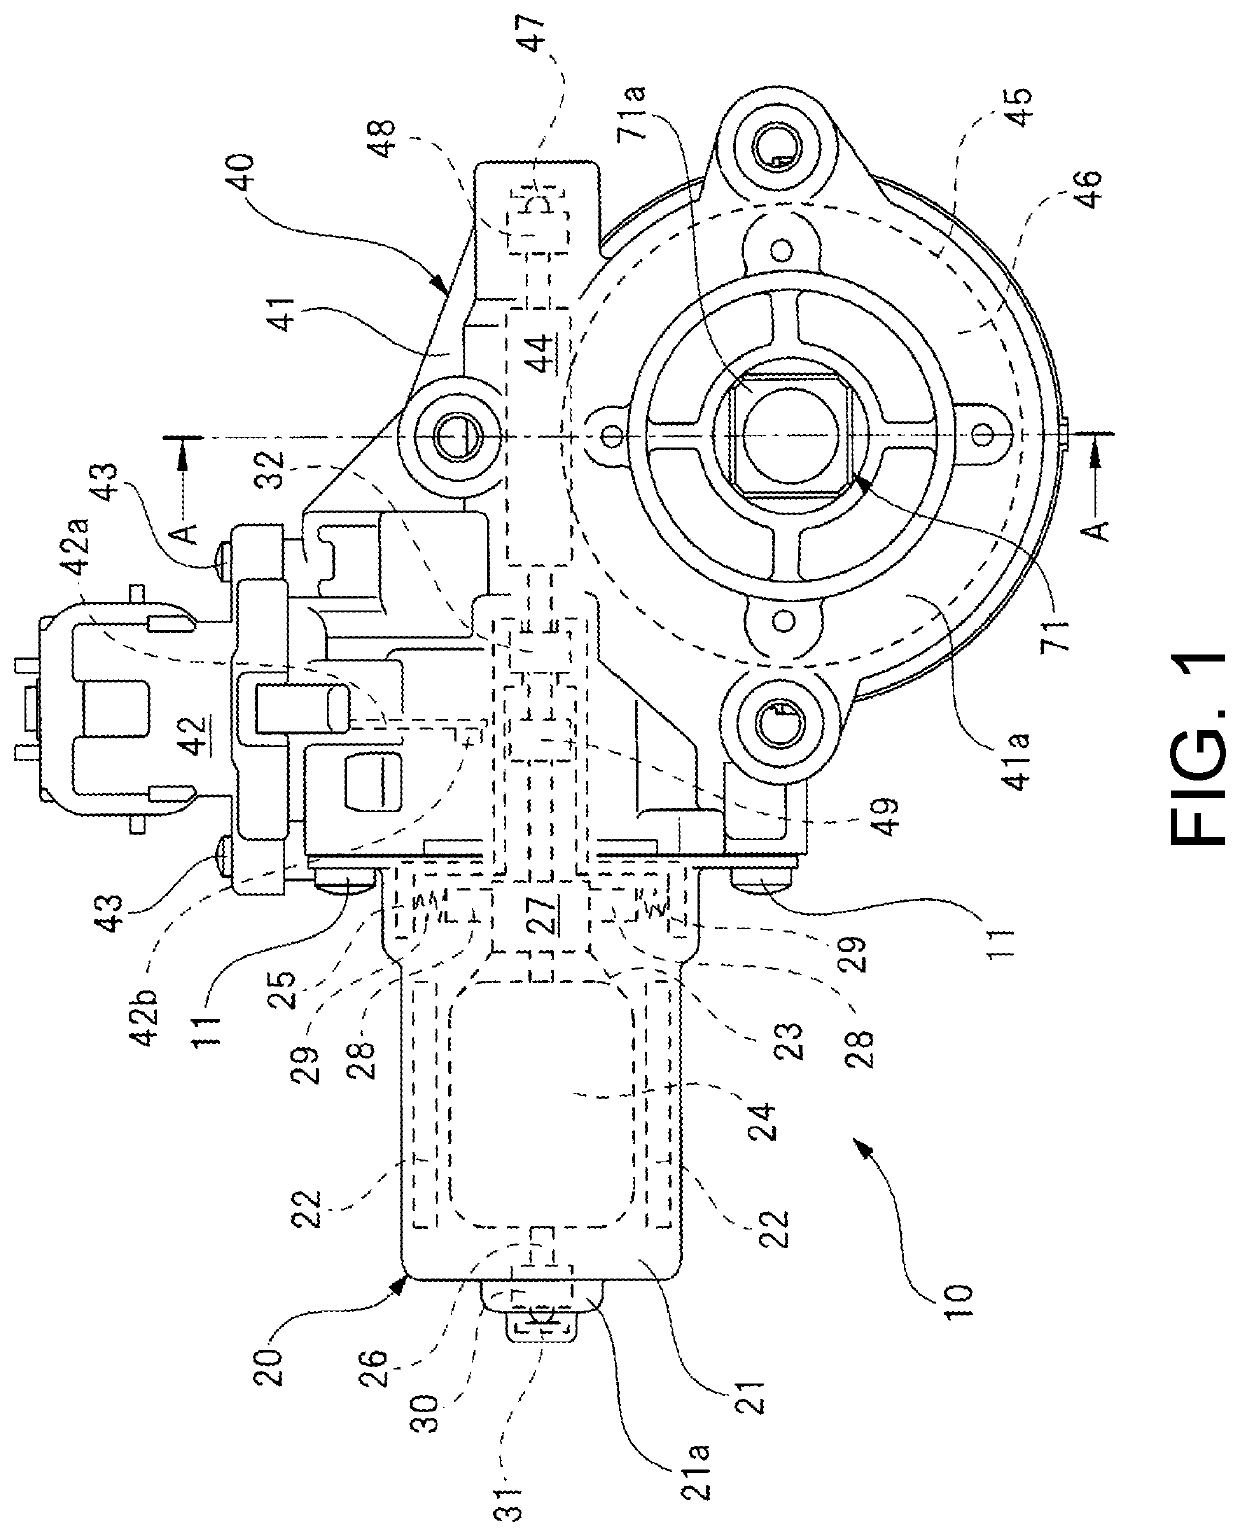 Motor provided with deceleration mechanism